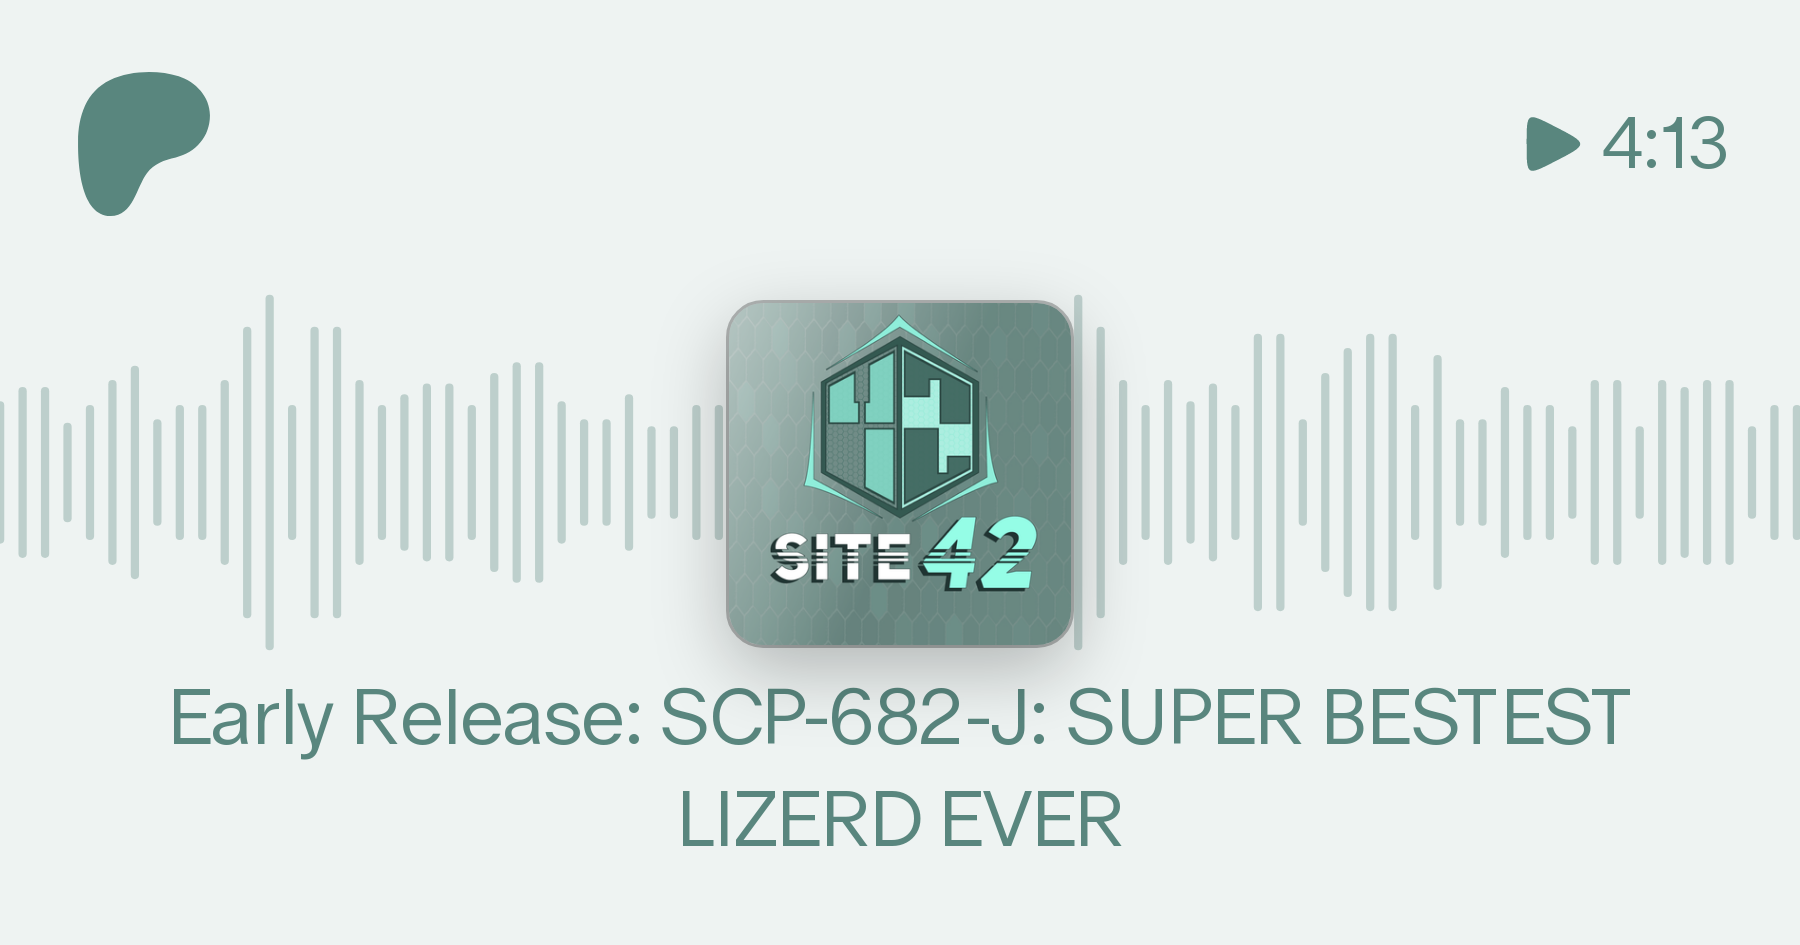 Early Release: SCP-682-J: SUPER BESTEST LIZERD EVER